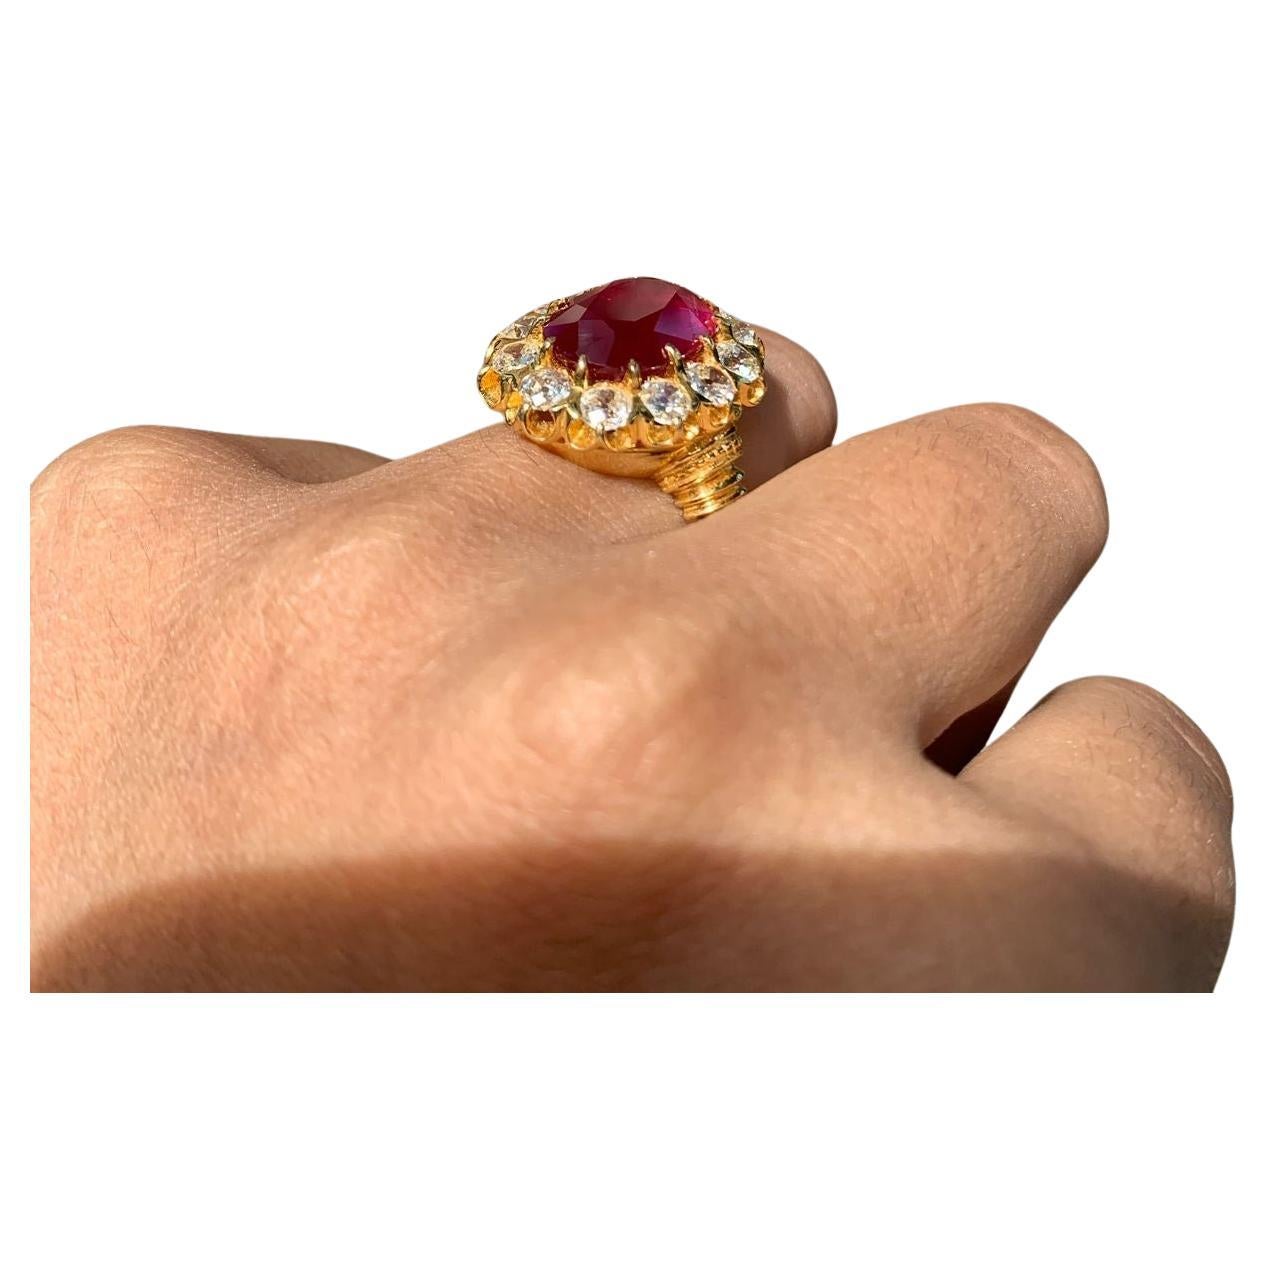 breathtaking masterpiece, the 6.26 Carat No-Heat Ruby Ring, adorned with authentic Vintage Old Mine Cut Diamonds, all set in luxurious 18K Yellow Gold. The focal point of this ring is a captivating 6.26-carat oval-shaped ruby, a rare unheated gem